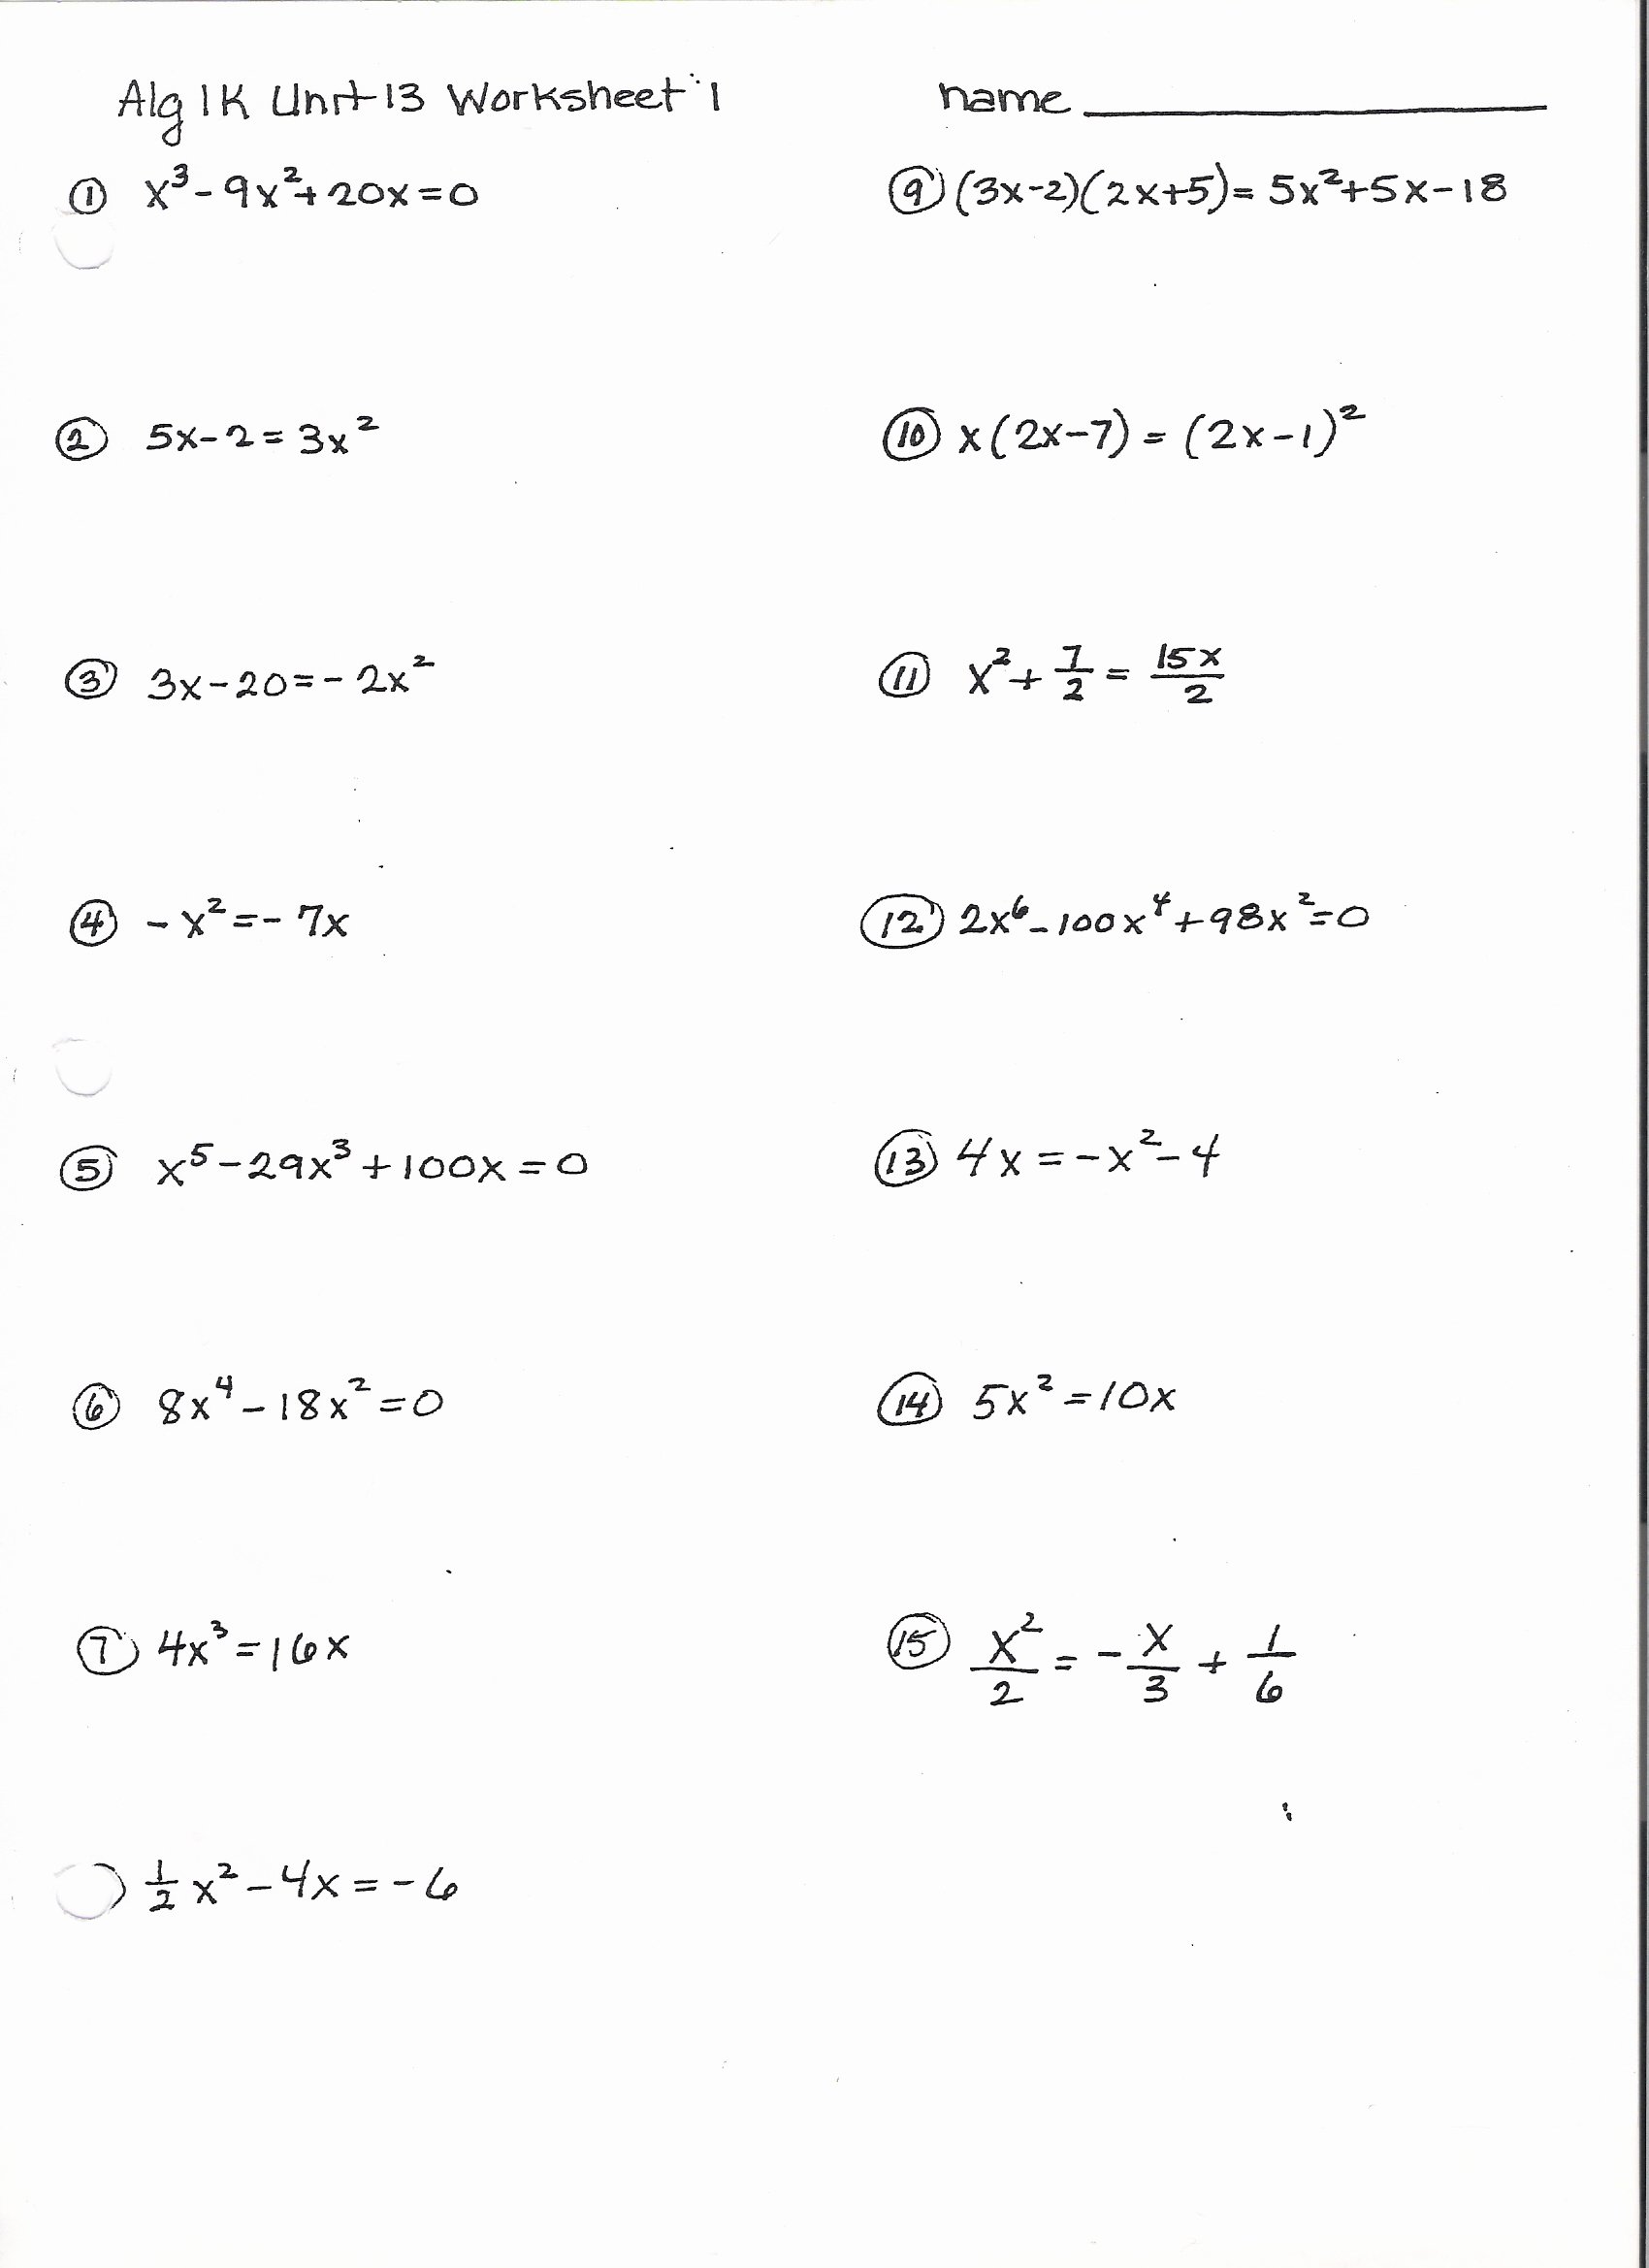 Multiplying Polynomials Worksheet 1 Answers Lovely 11 Best Of Algebra 1 Multiplying Polynomials